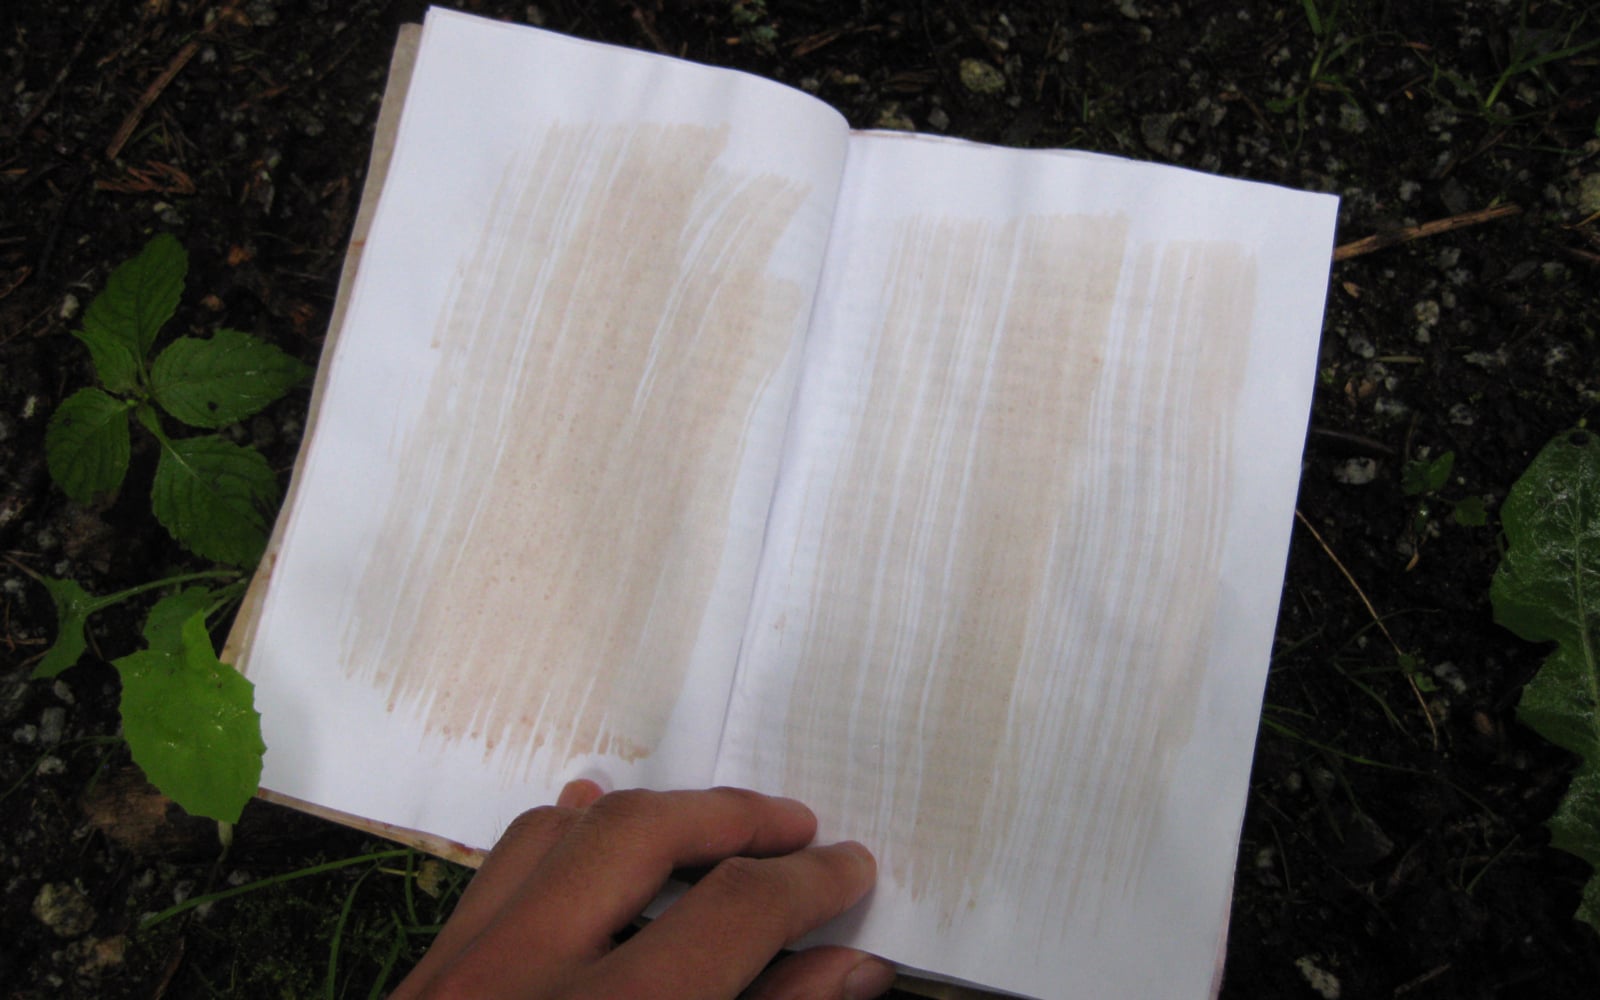 an open book on a wet forest floor. The pages are blank and have been treated with splashes of ink.